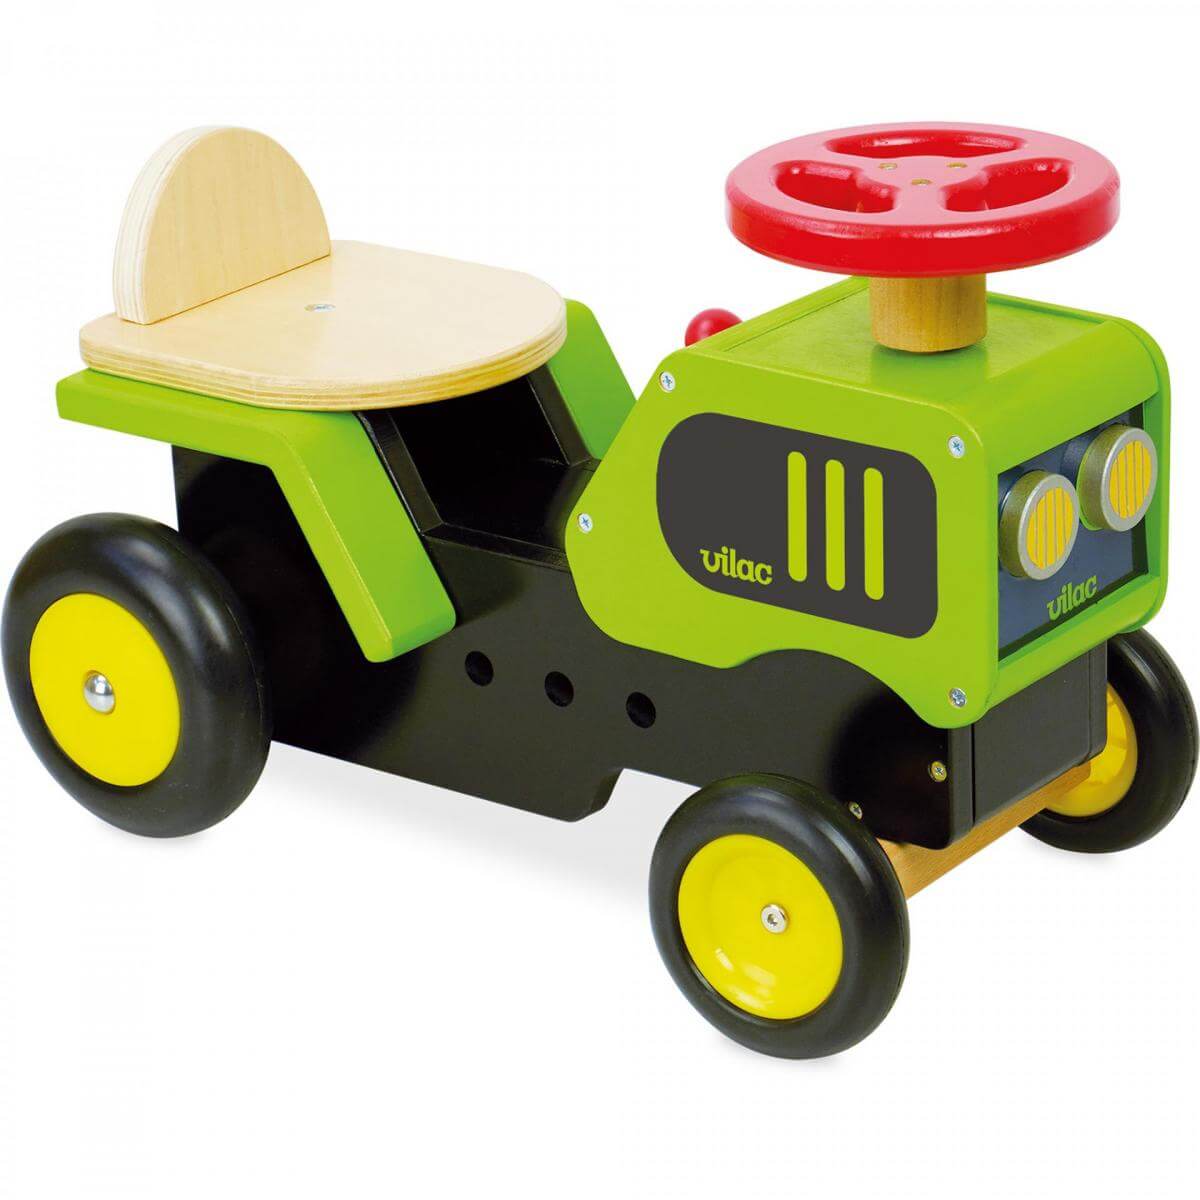 Wooden ride on tractor. This green tractor ride on toy is equipped with a horn and a gear lever with sound effects.